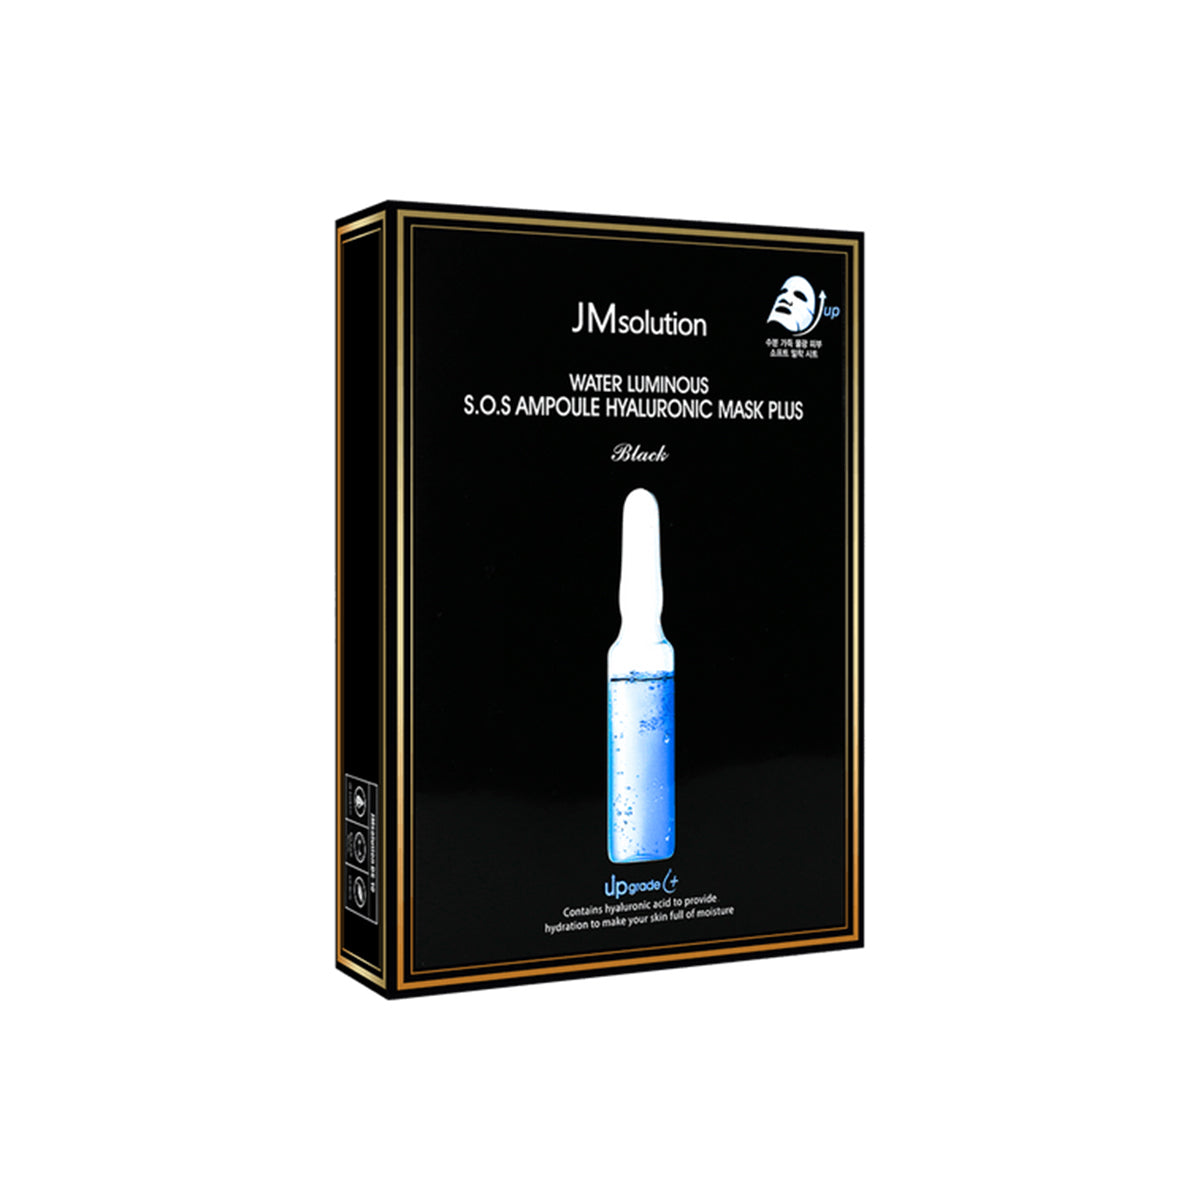 Water Luminous S.O.S Ampoule Hyaluronic Mask 10 Sheets